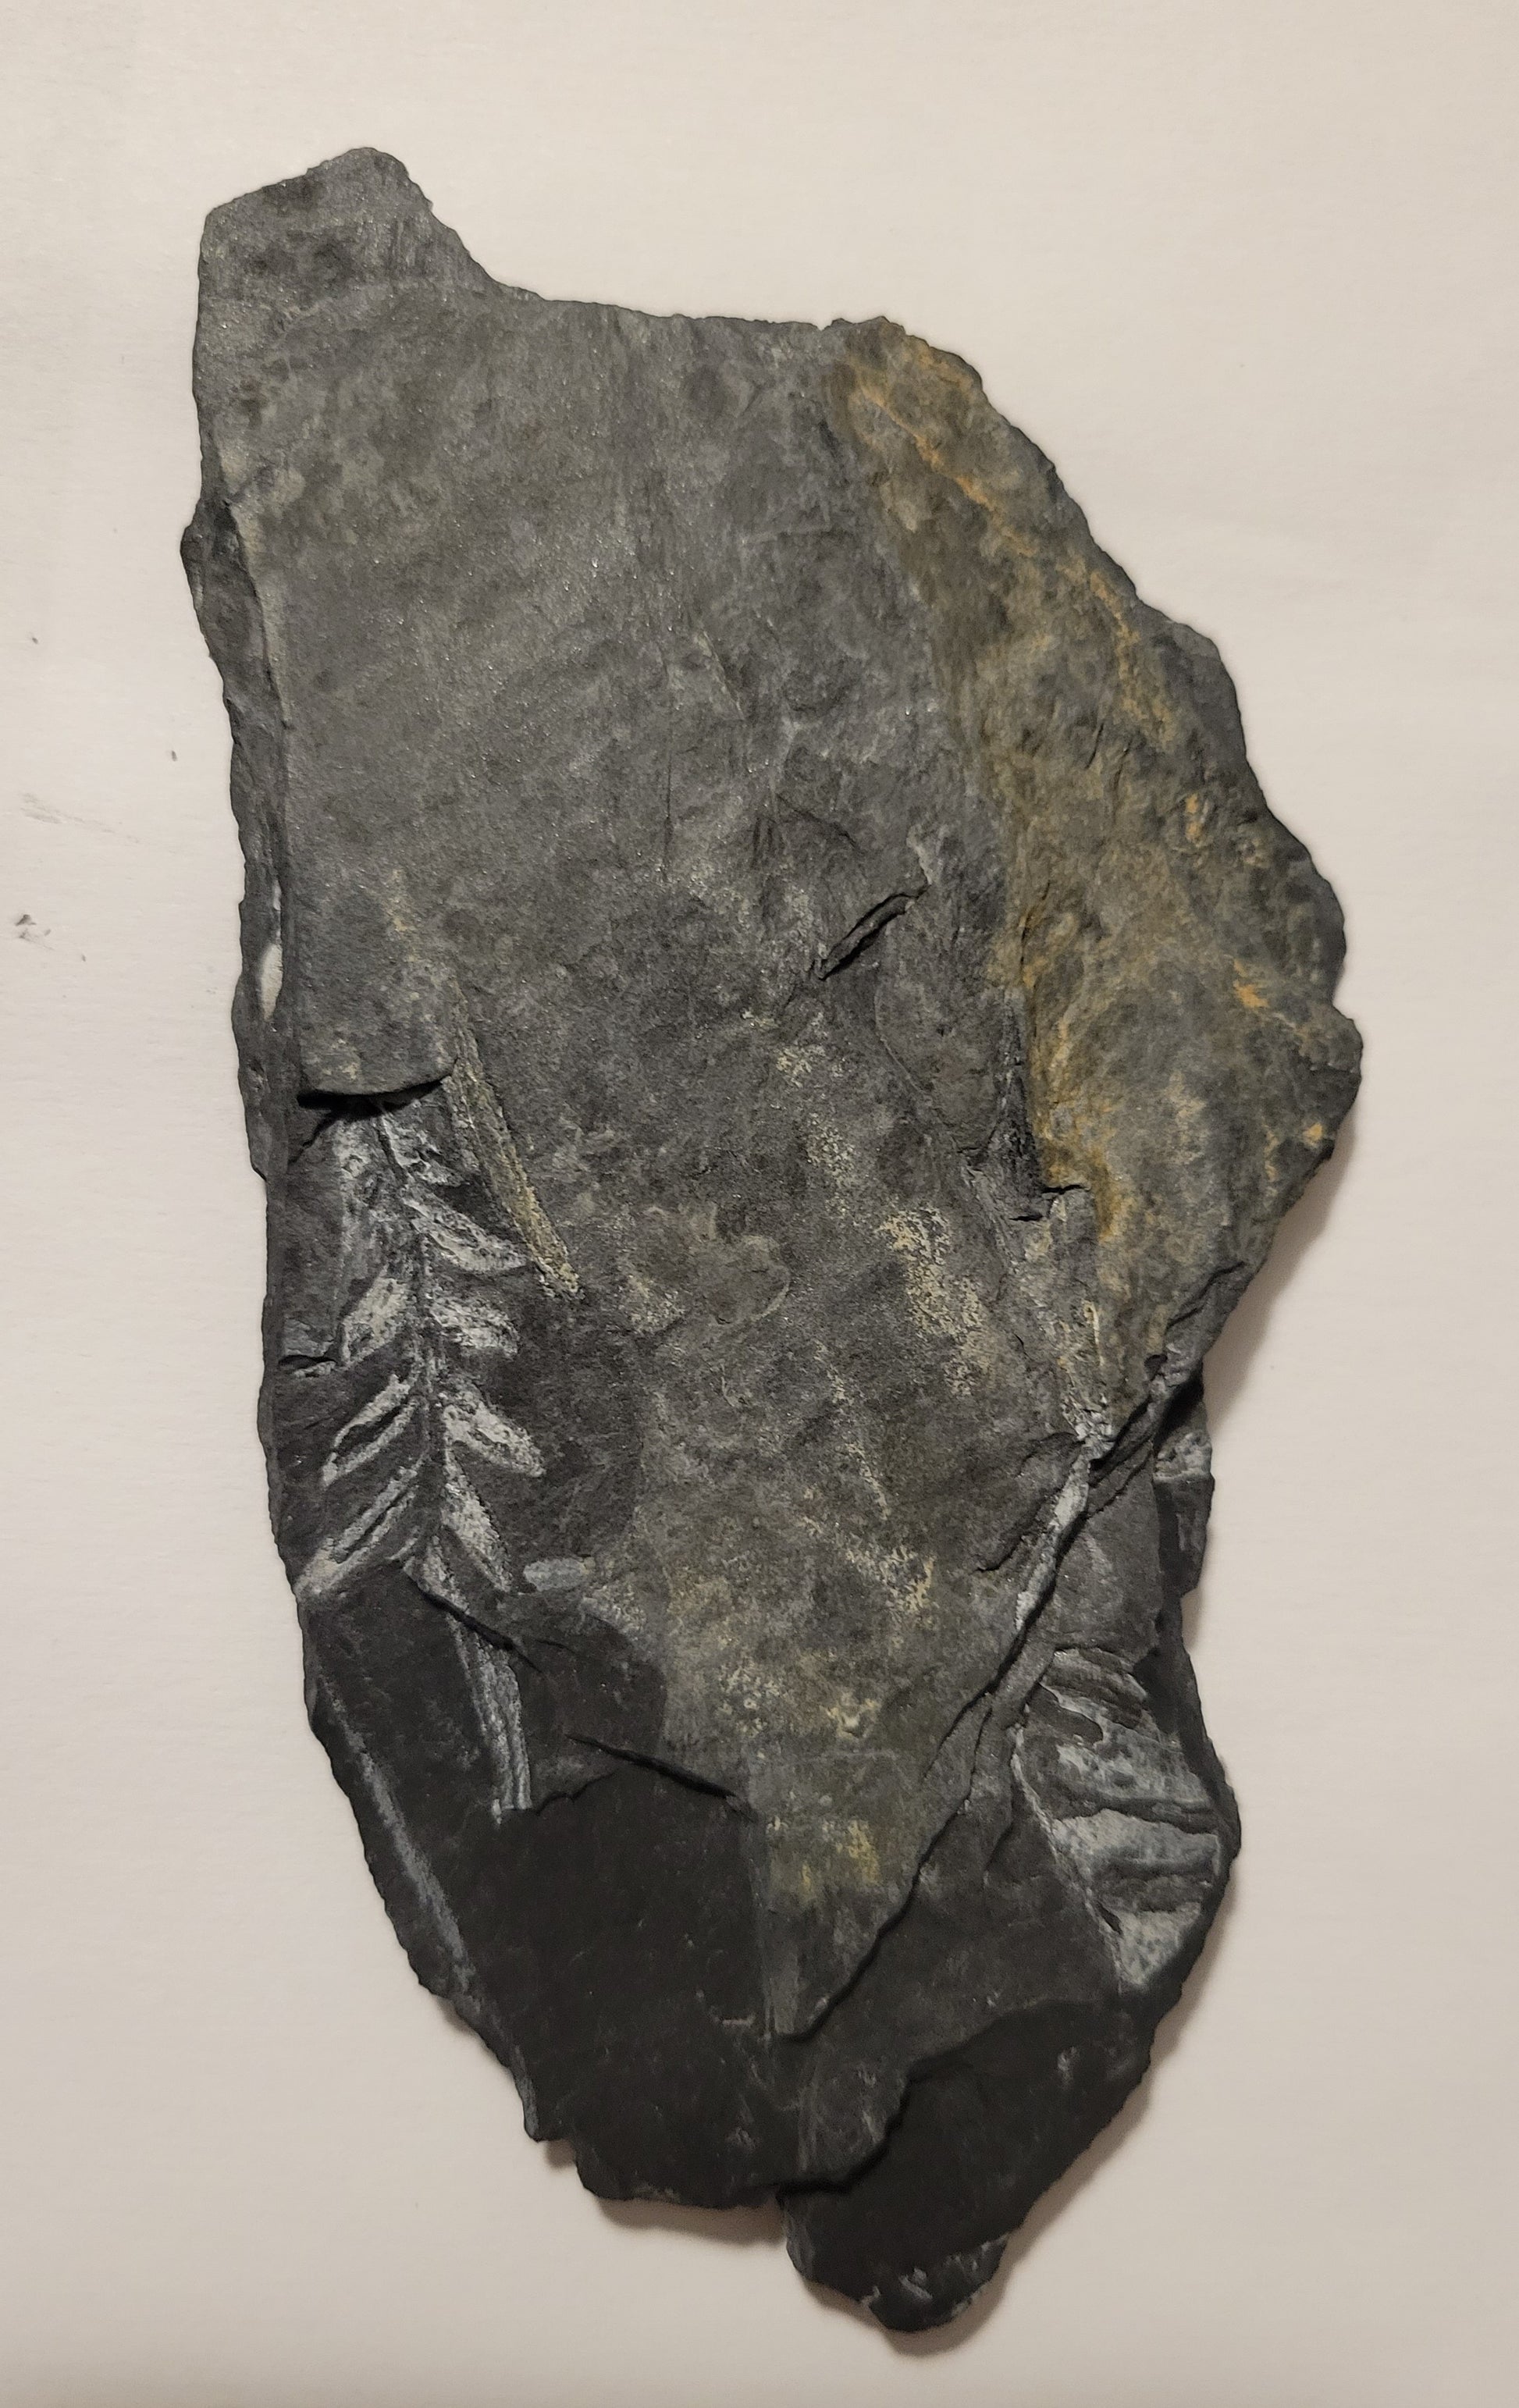 Genuine plant fossil embedded in slate, back view.